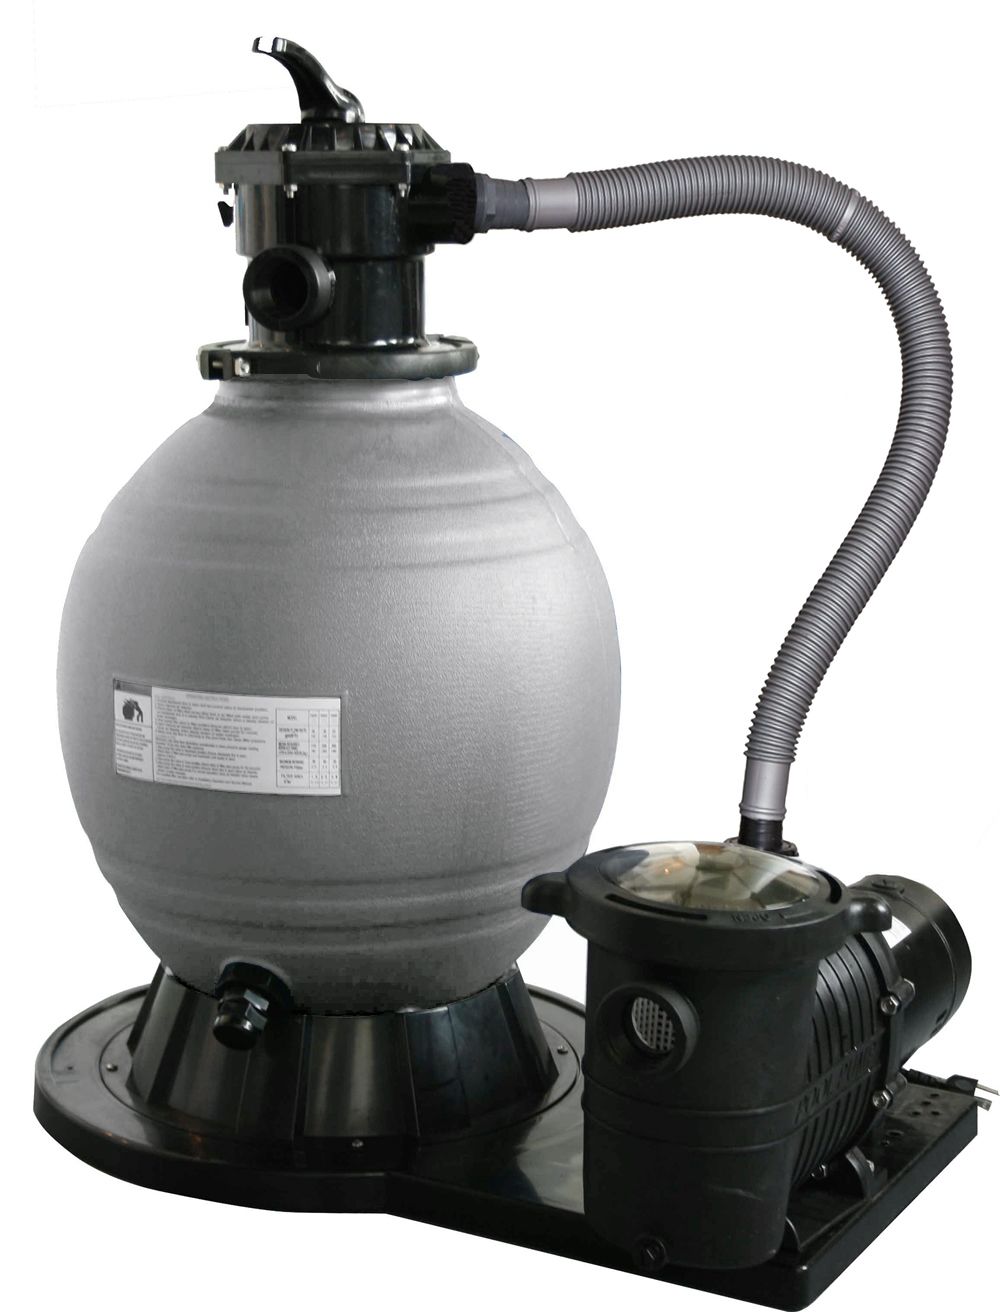 Blue Wave 22" Sand Filter System with 1.5 HP Pump for Above Ground Swimming Pools